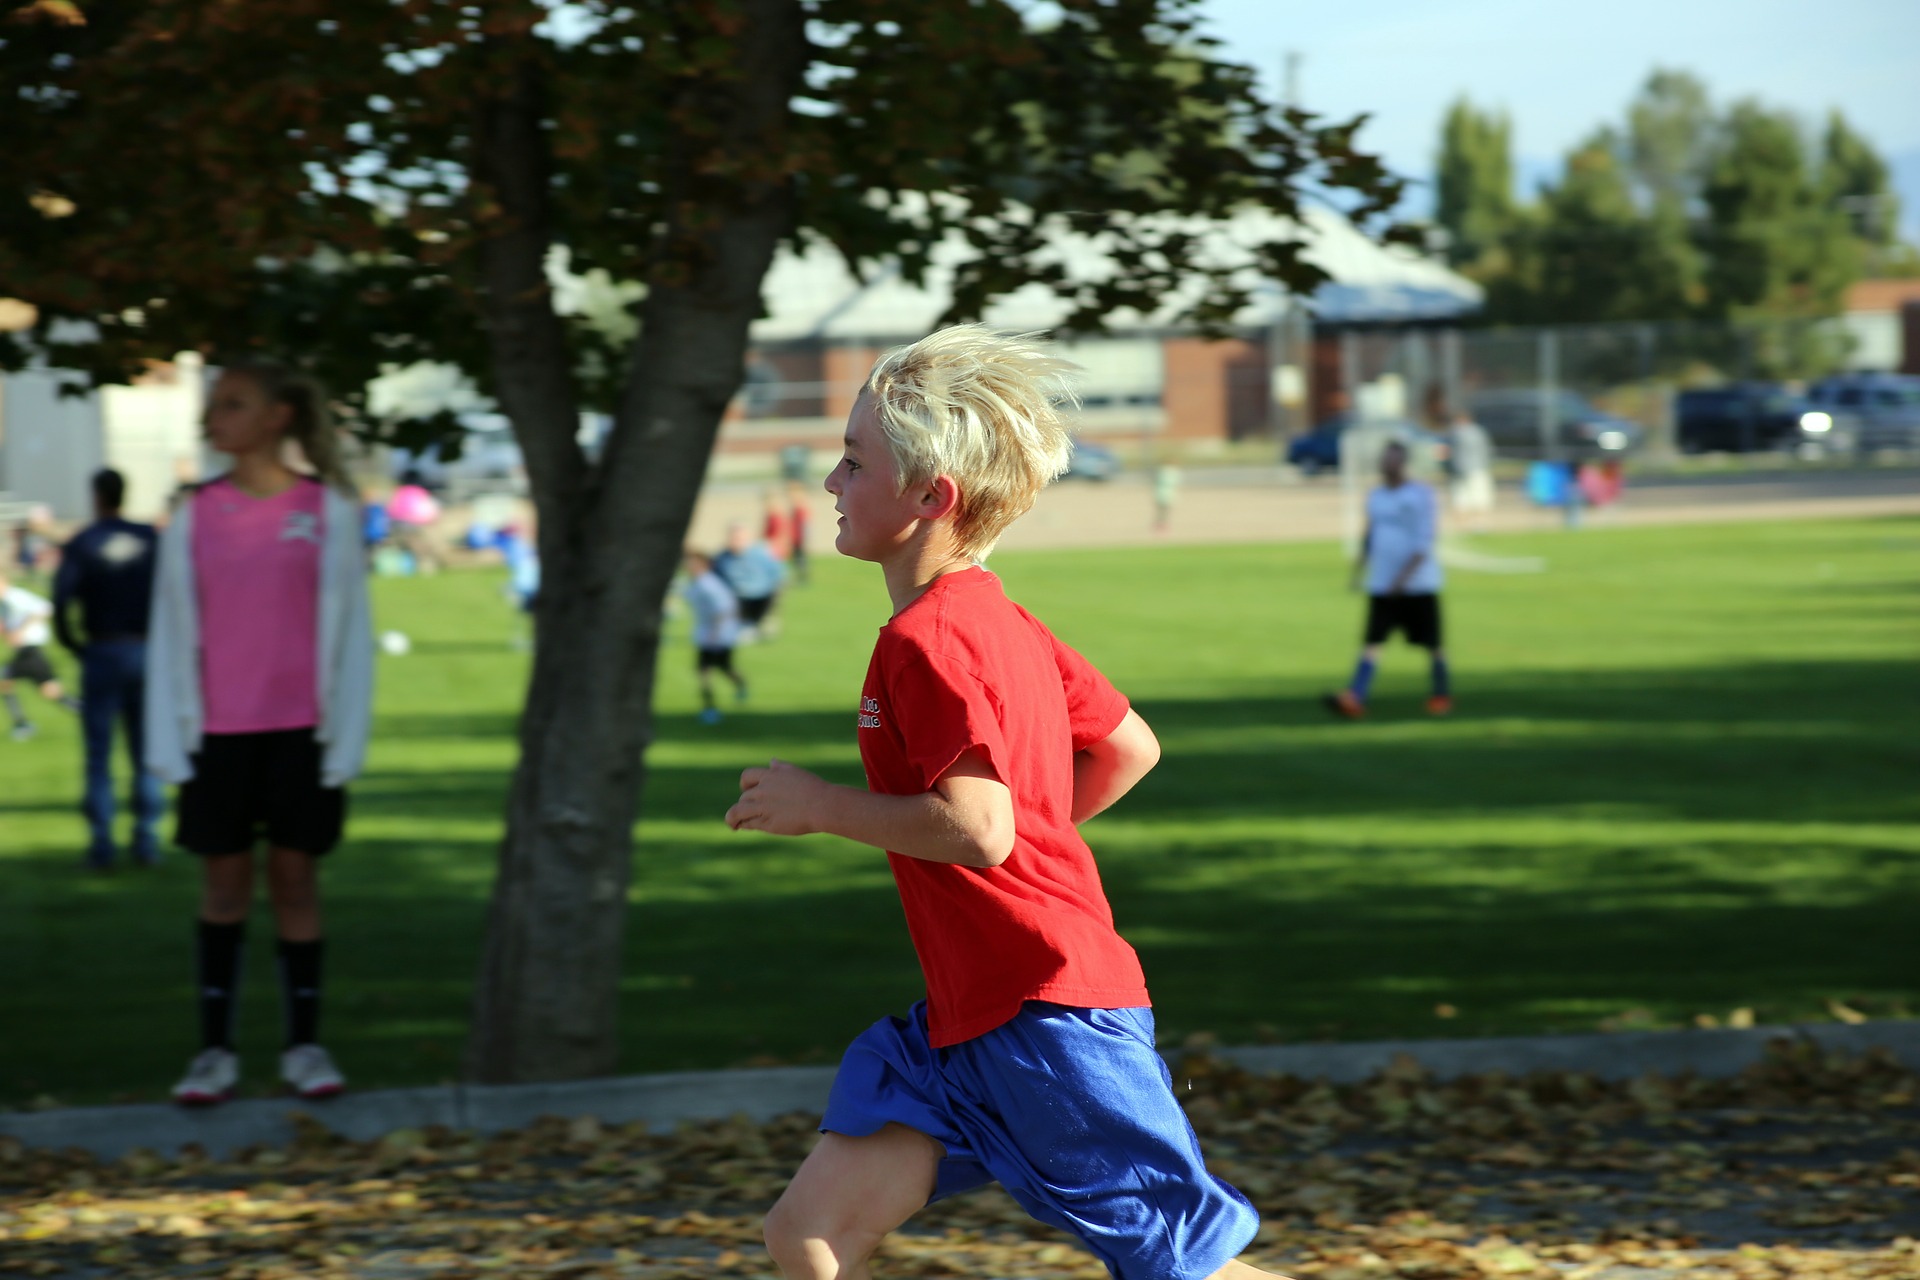 a young boy in a red shirt running